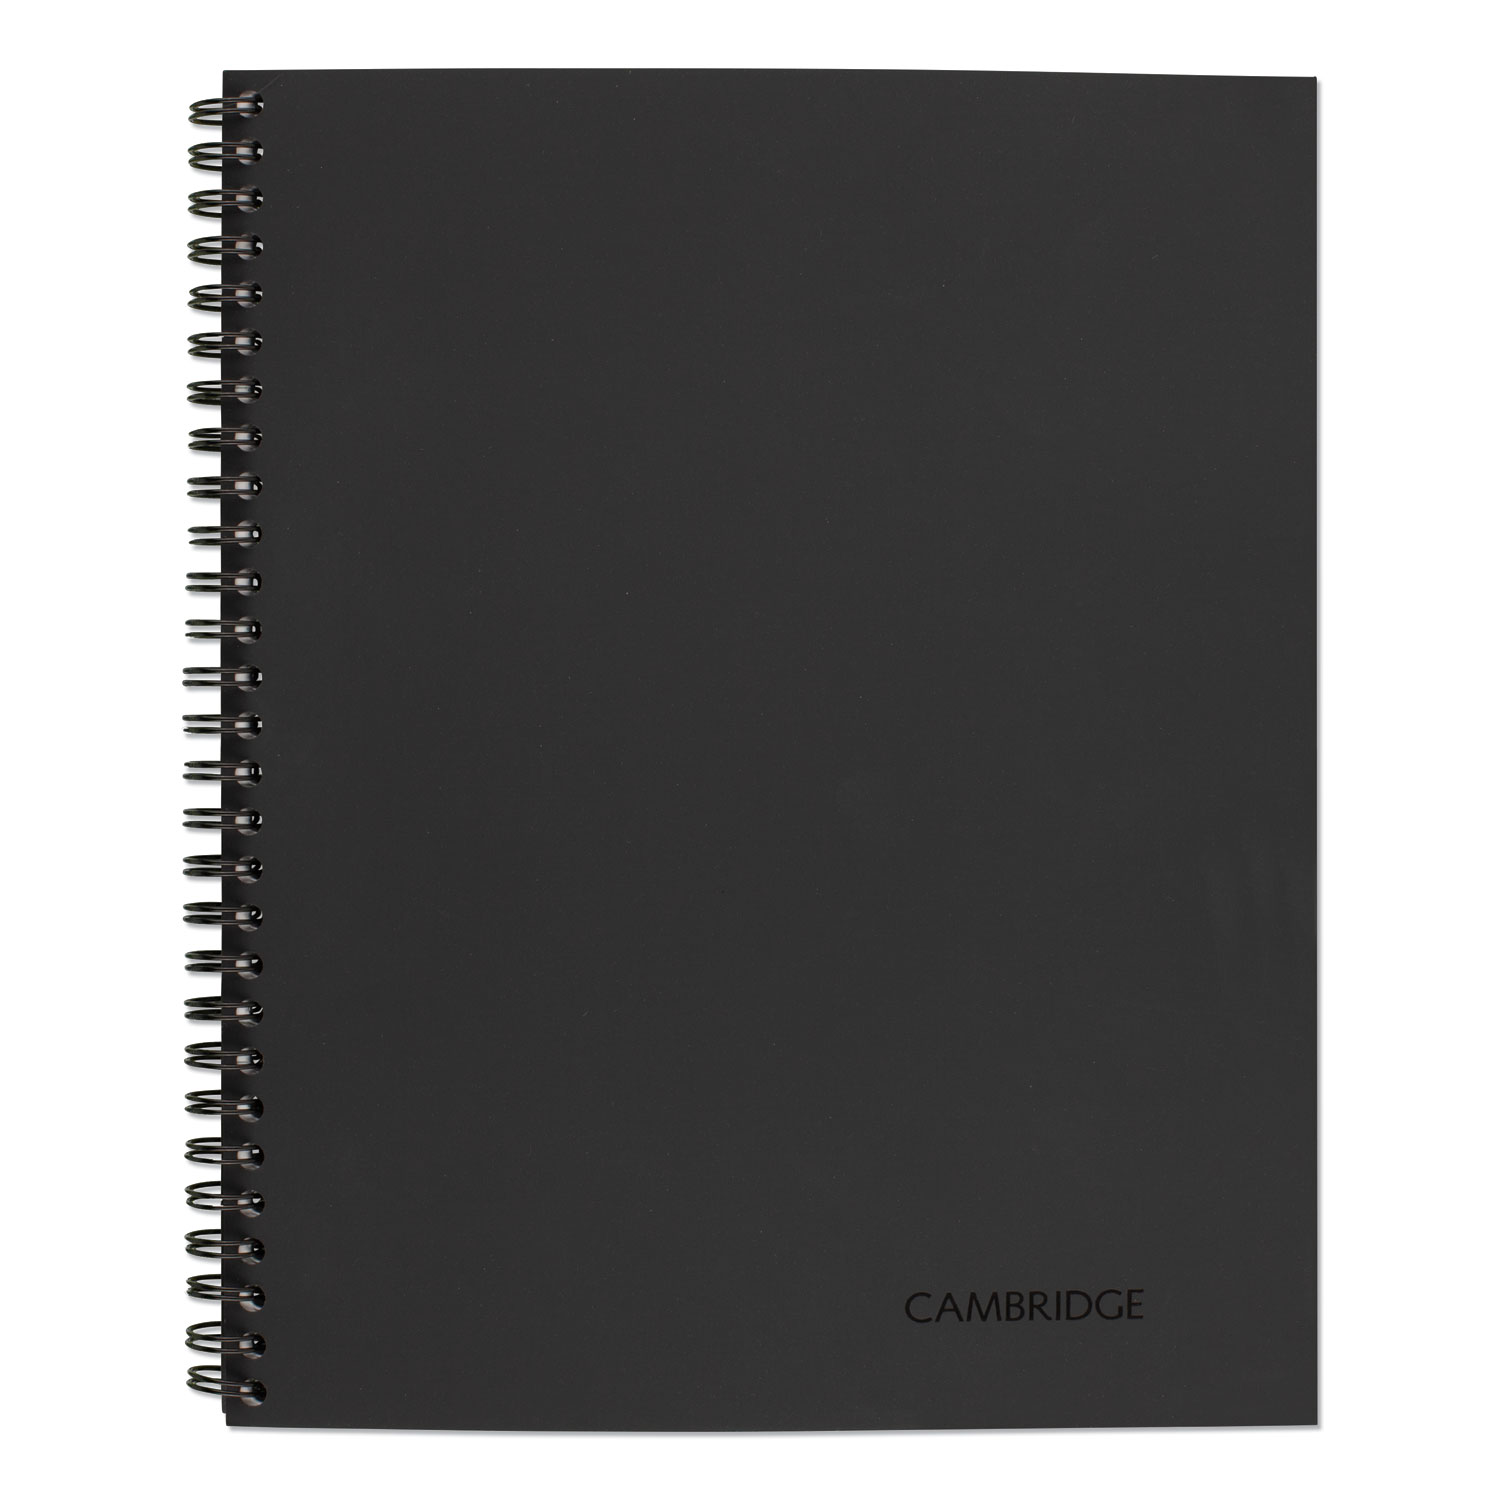  Cambridge 06062 Wirebound Business Notebook, Wide/Legal Rule, Black Cover, 11 x 8.5, 80 Sheets (MEA06062) 